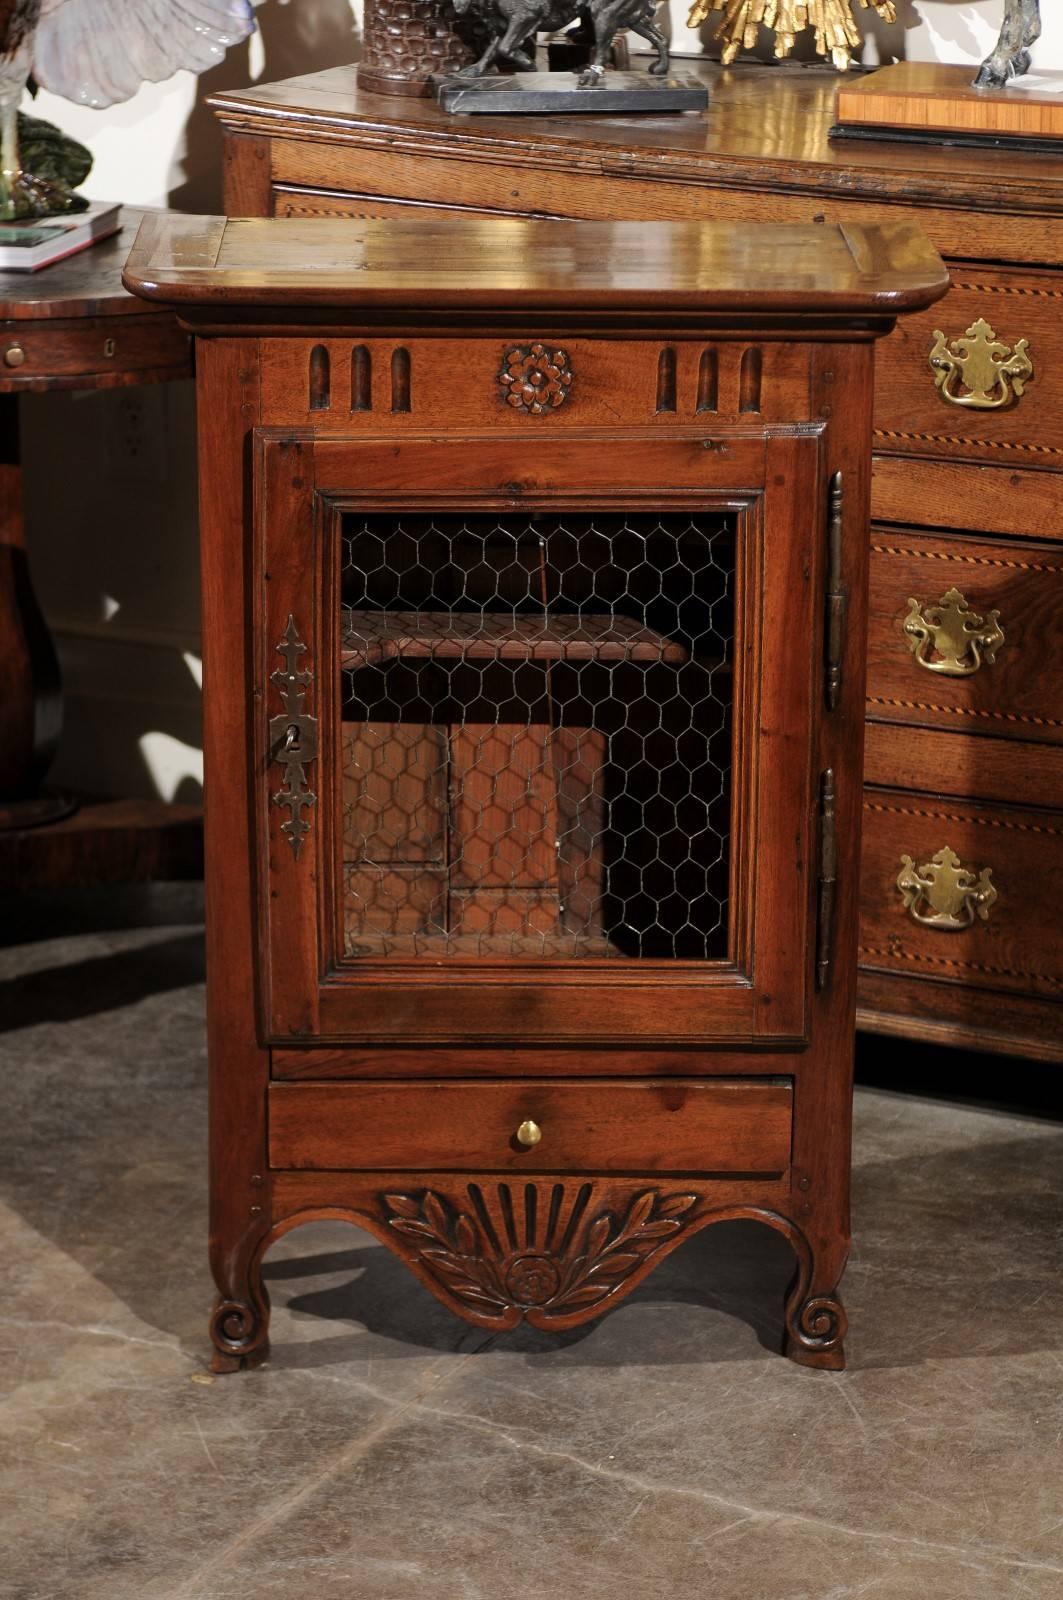 A French walnut small size cabinet from the mid-19th century. This French narrow cabinet features a door with chicken wire over a single lower drawer. 
The door opens to a storage area with two upper shelves. In the lower section, a single drawer